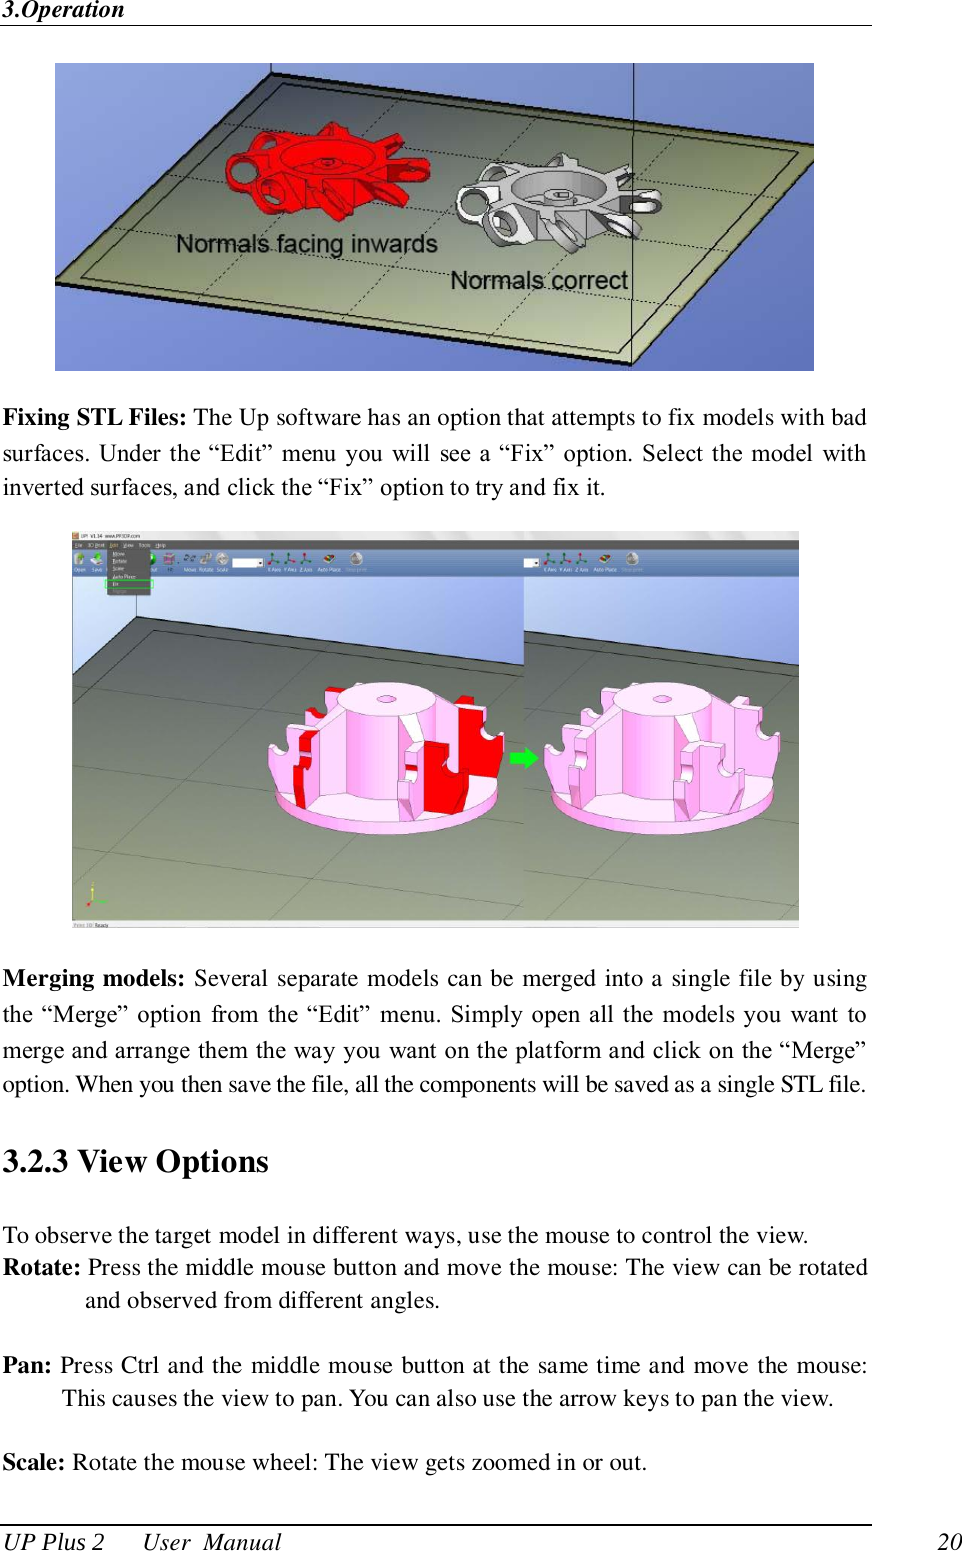 3.Operation UP Plus 2      User  Manual                                20  Fixing STL Files: The Up software has an option that attempts to fix models with bad surfaces.  Under the ―Edit‖  menu you  will see a ―Fix‖ option. Select the model with inverted surfaces, and click the ―Fix‖ option to try and fix it.  Merging models: Several separate models can be merged into a single file by using the ―Merge‖ option  from  the  ―Edit‖  menu.  Simply open all  the  models you want  to merge and arrange them the way you want on the platform and click on the ―Merge‖ option. When you then save the file, all the components will be saved as a single STL file. 3.2.3 View Options To observe the target model in different ways, use the mouse to control the view. Rotate: Press the middle mouse button and move the mouse: The view can be rotated and observed from different angles.  Pan: Press Ctrl and the middle mouse button at the same time and move the mouse: This causes the view to pan. You can also use the arrow keys to pan the view.  Scale: Rotate the mouse wheel: The view gets zoomed in or out.  